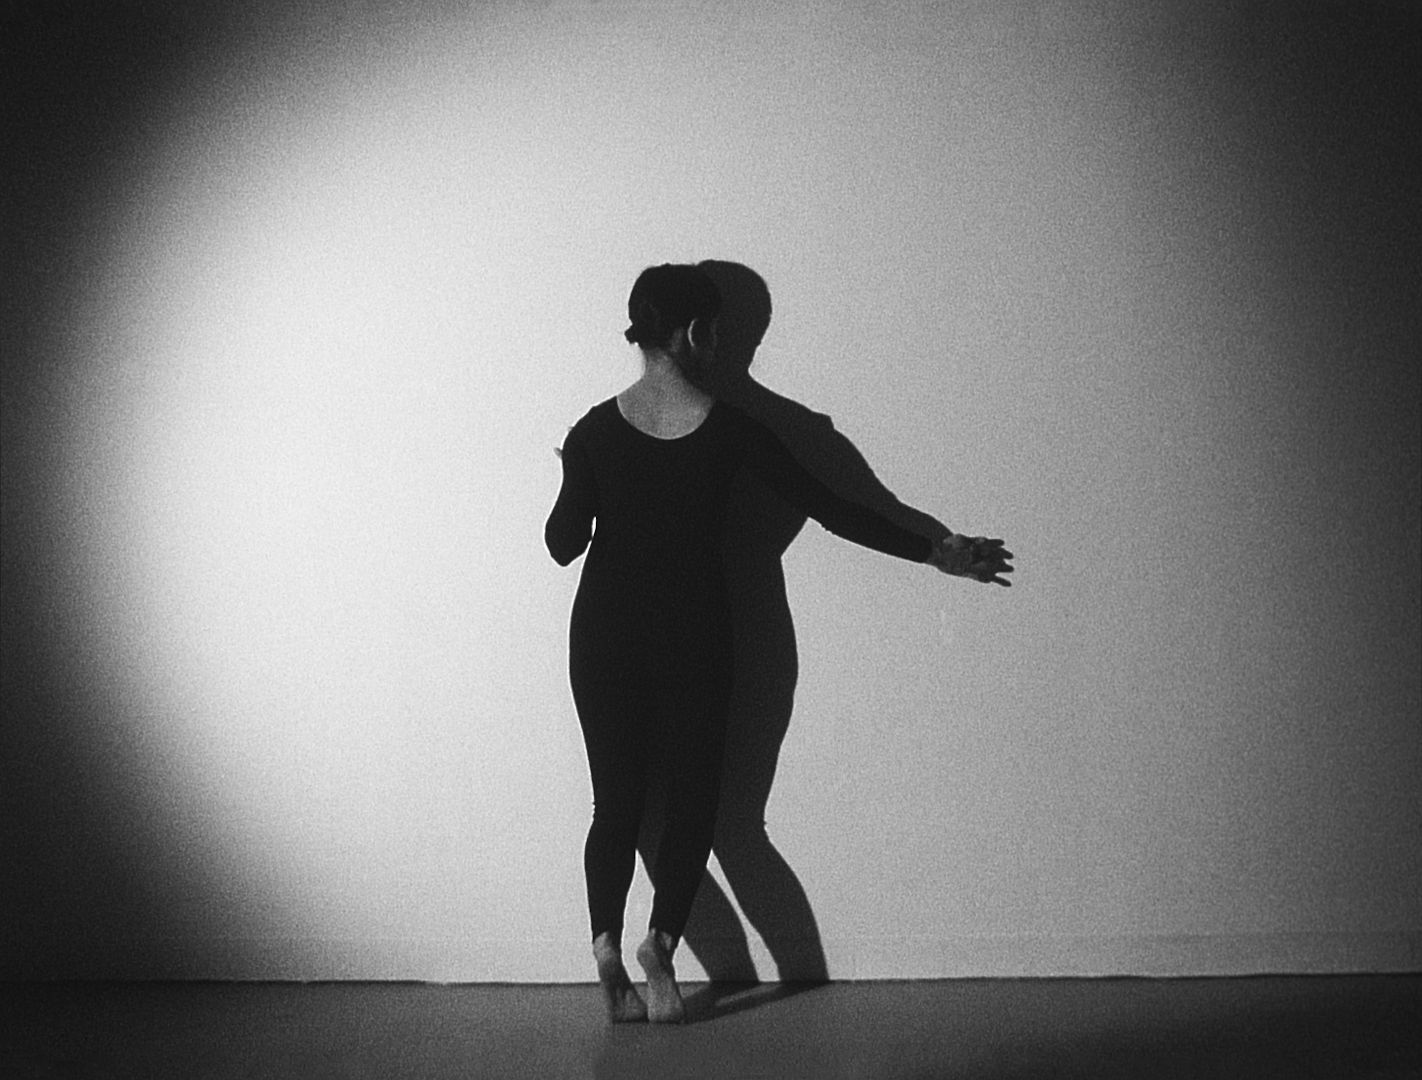 Gina Osterloh, Press and Outline, 2014. 16mm film loop, black and white, no audio, TRT 5 min. 30 sec. Image courtesy of the artist, Higher Pictures Generation (New York) and Silverlens (Manila and New York)